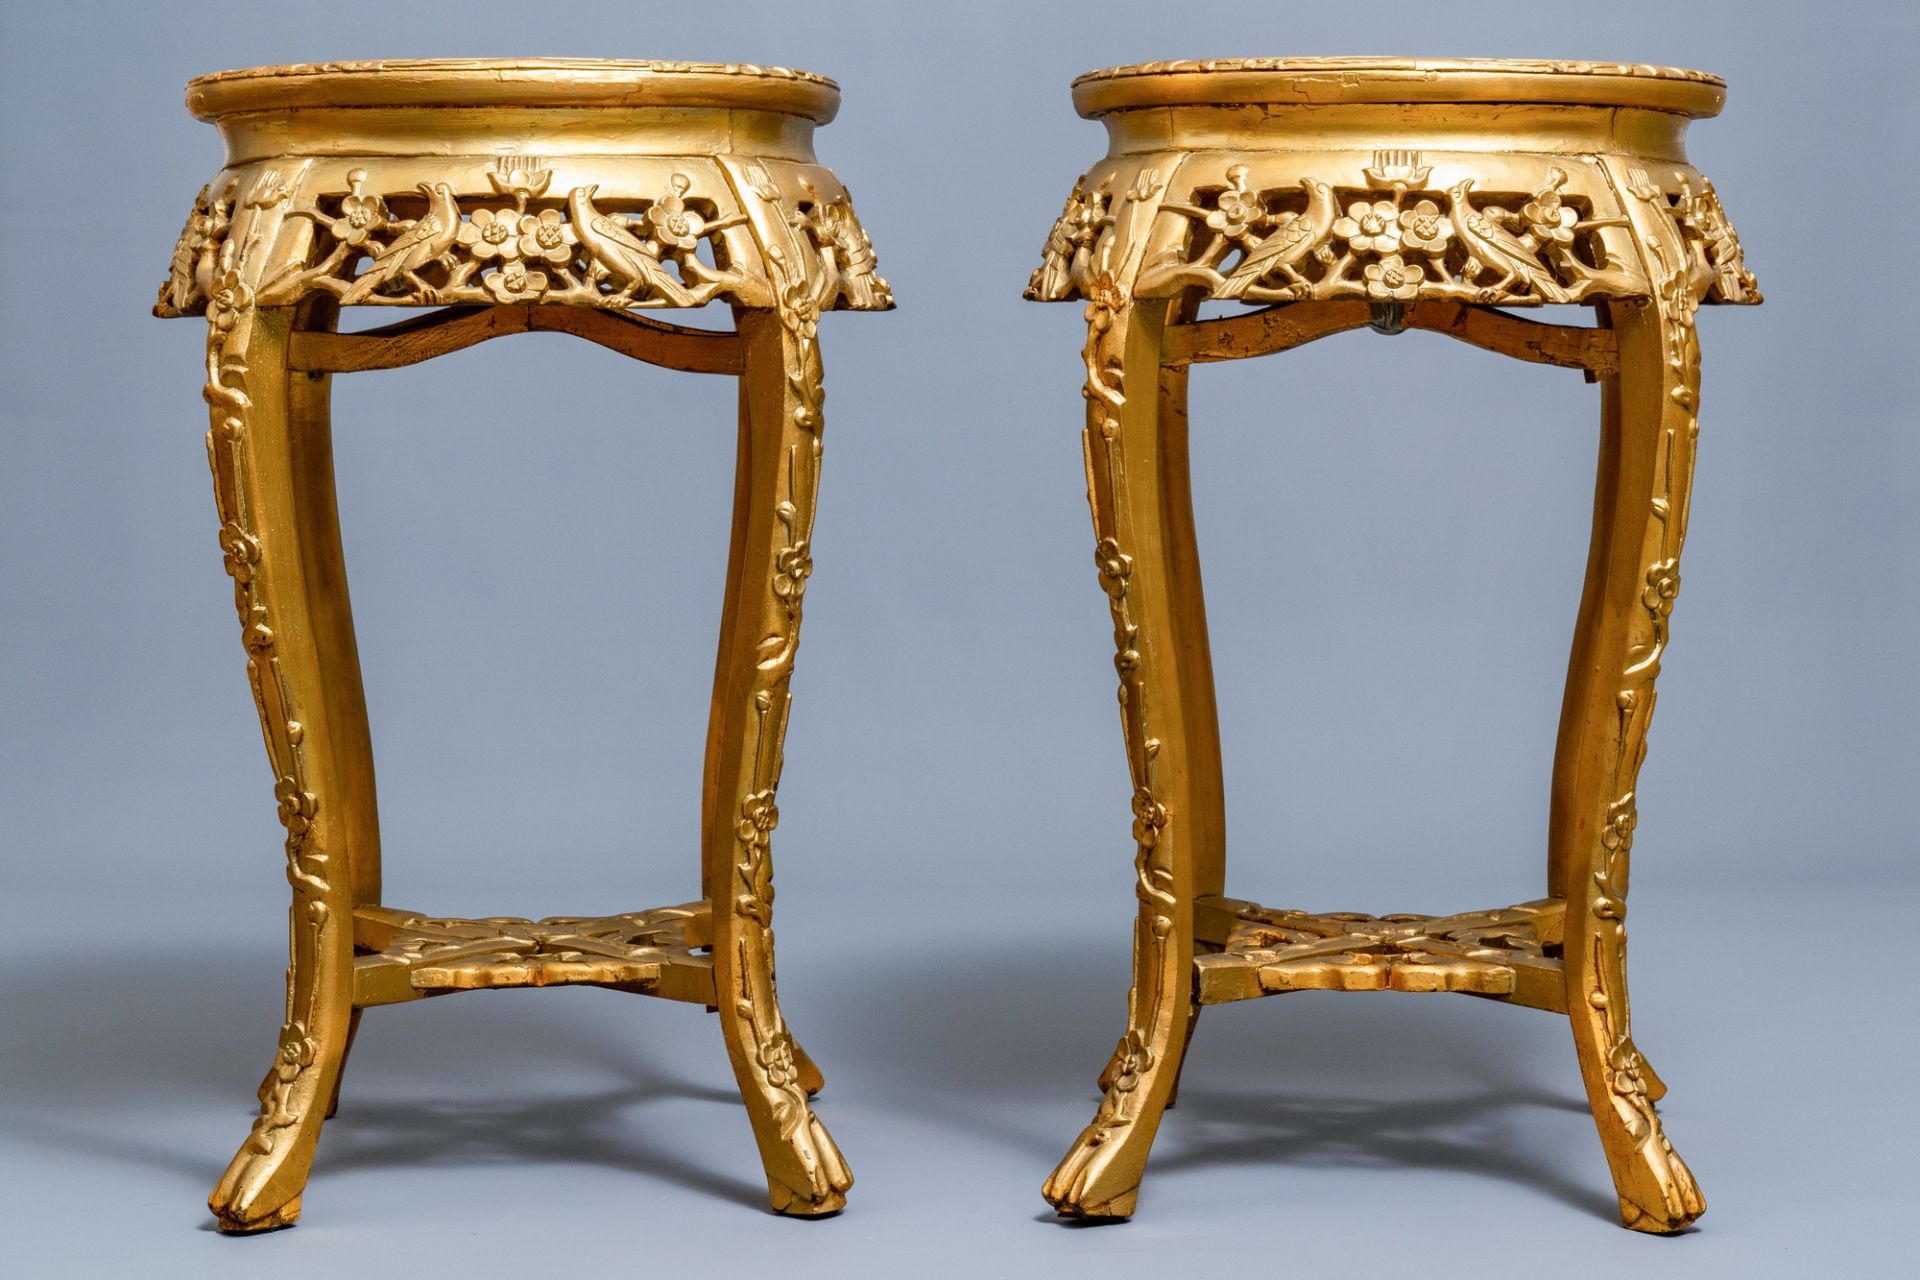 A pair of massive French Svres-style vases with gilded bronze mounts, signed Desprez, 19th C. - Image 17 of 56